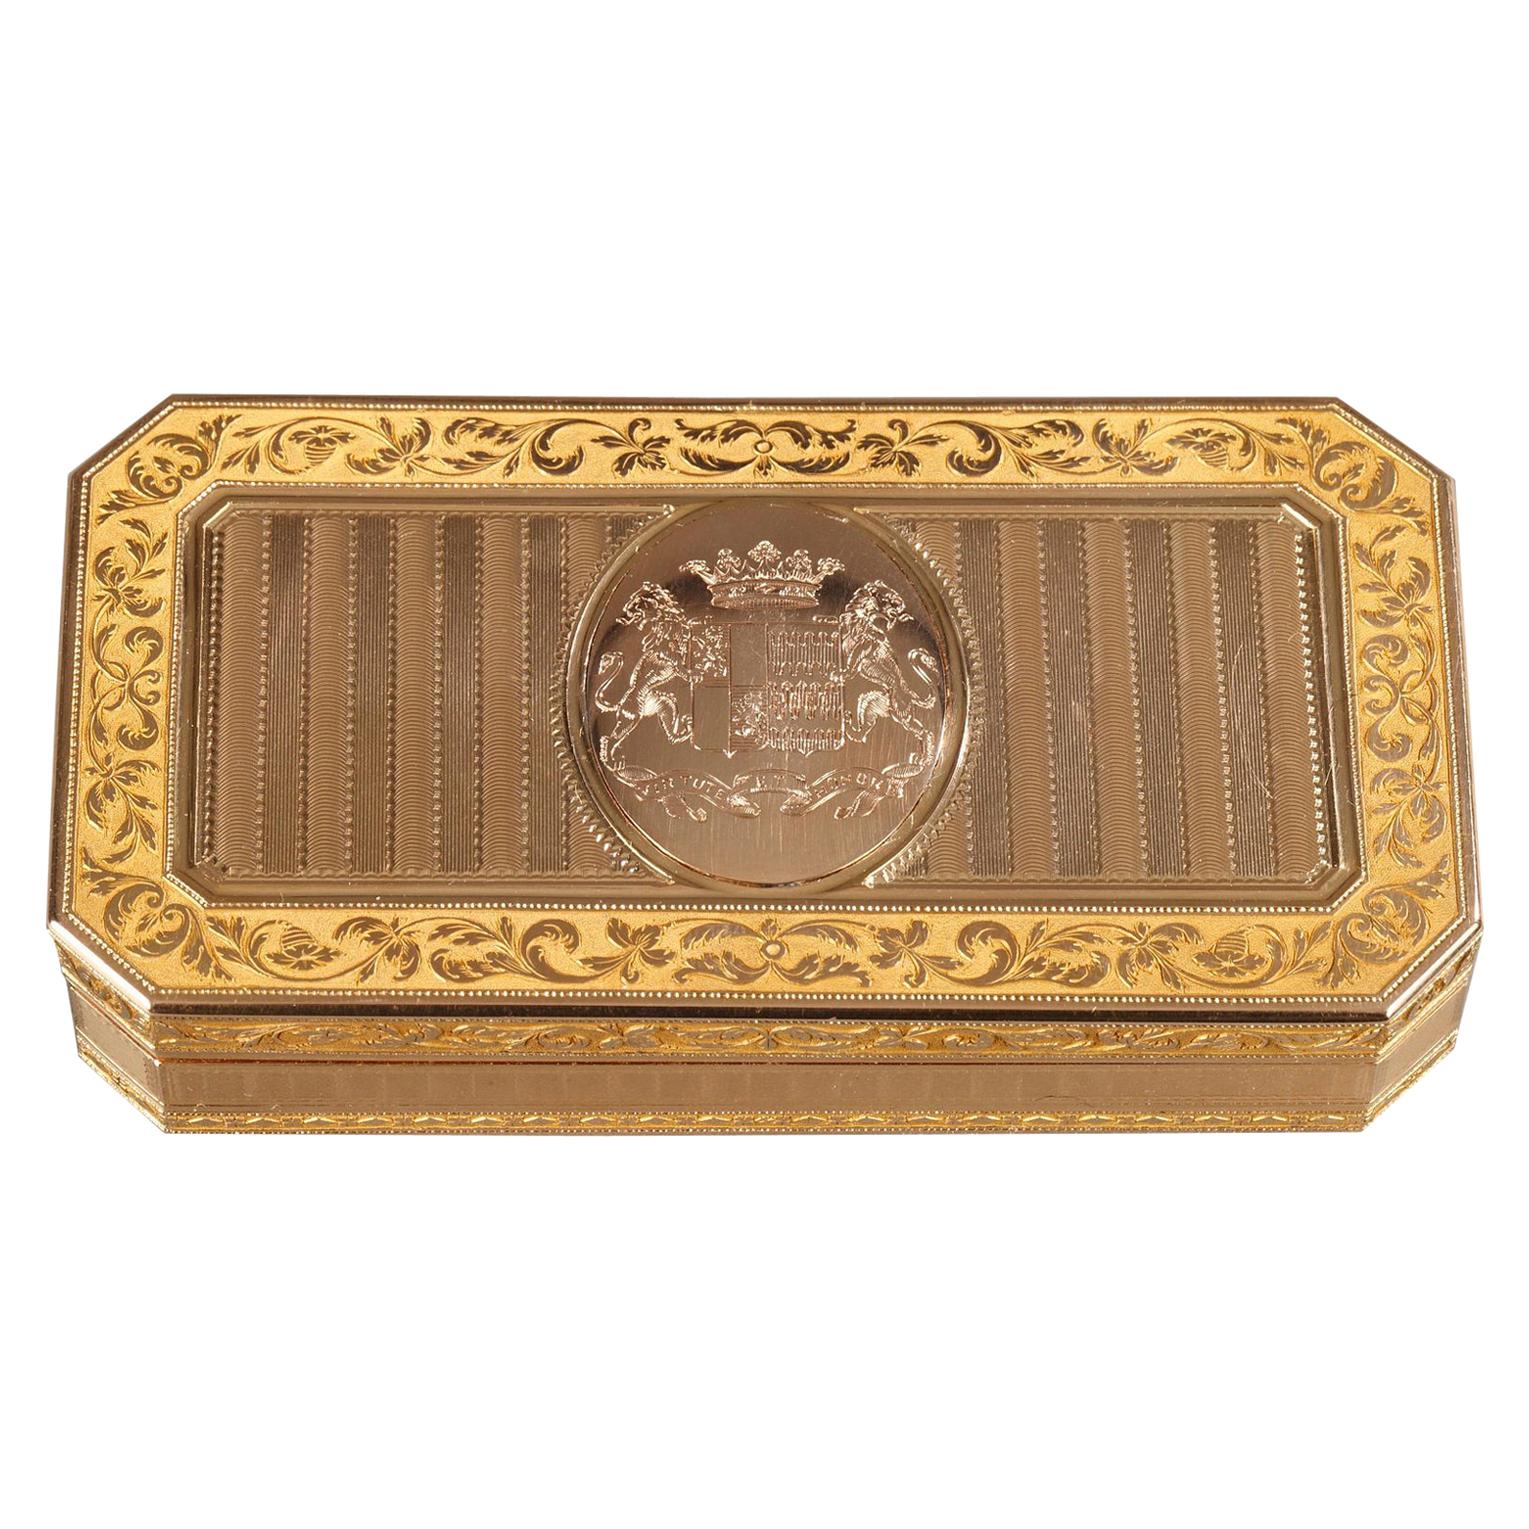 Large French Gold Snuffbox